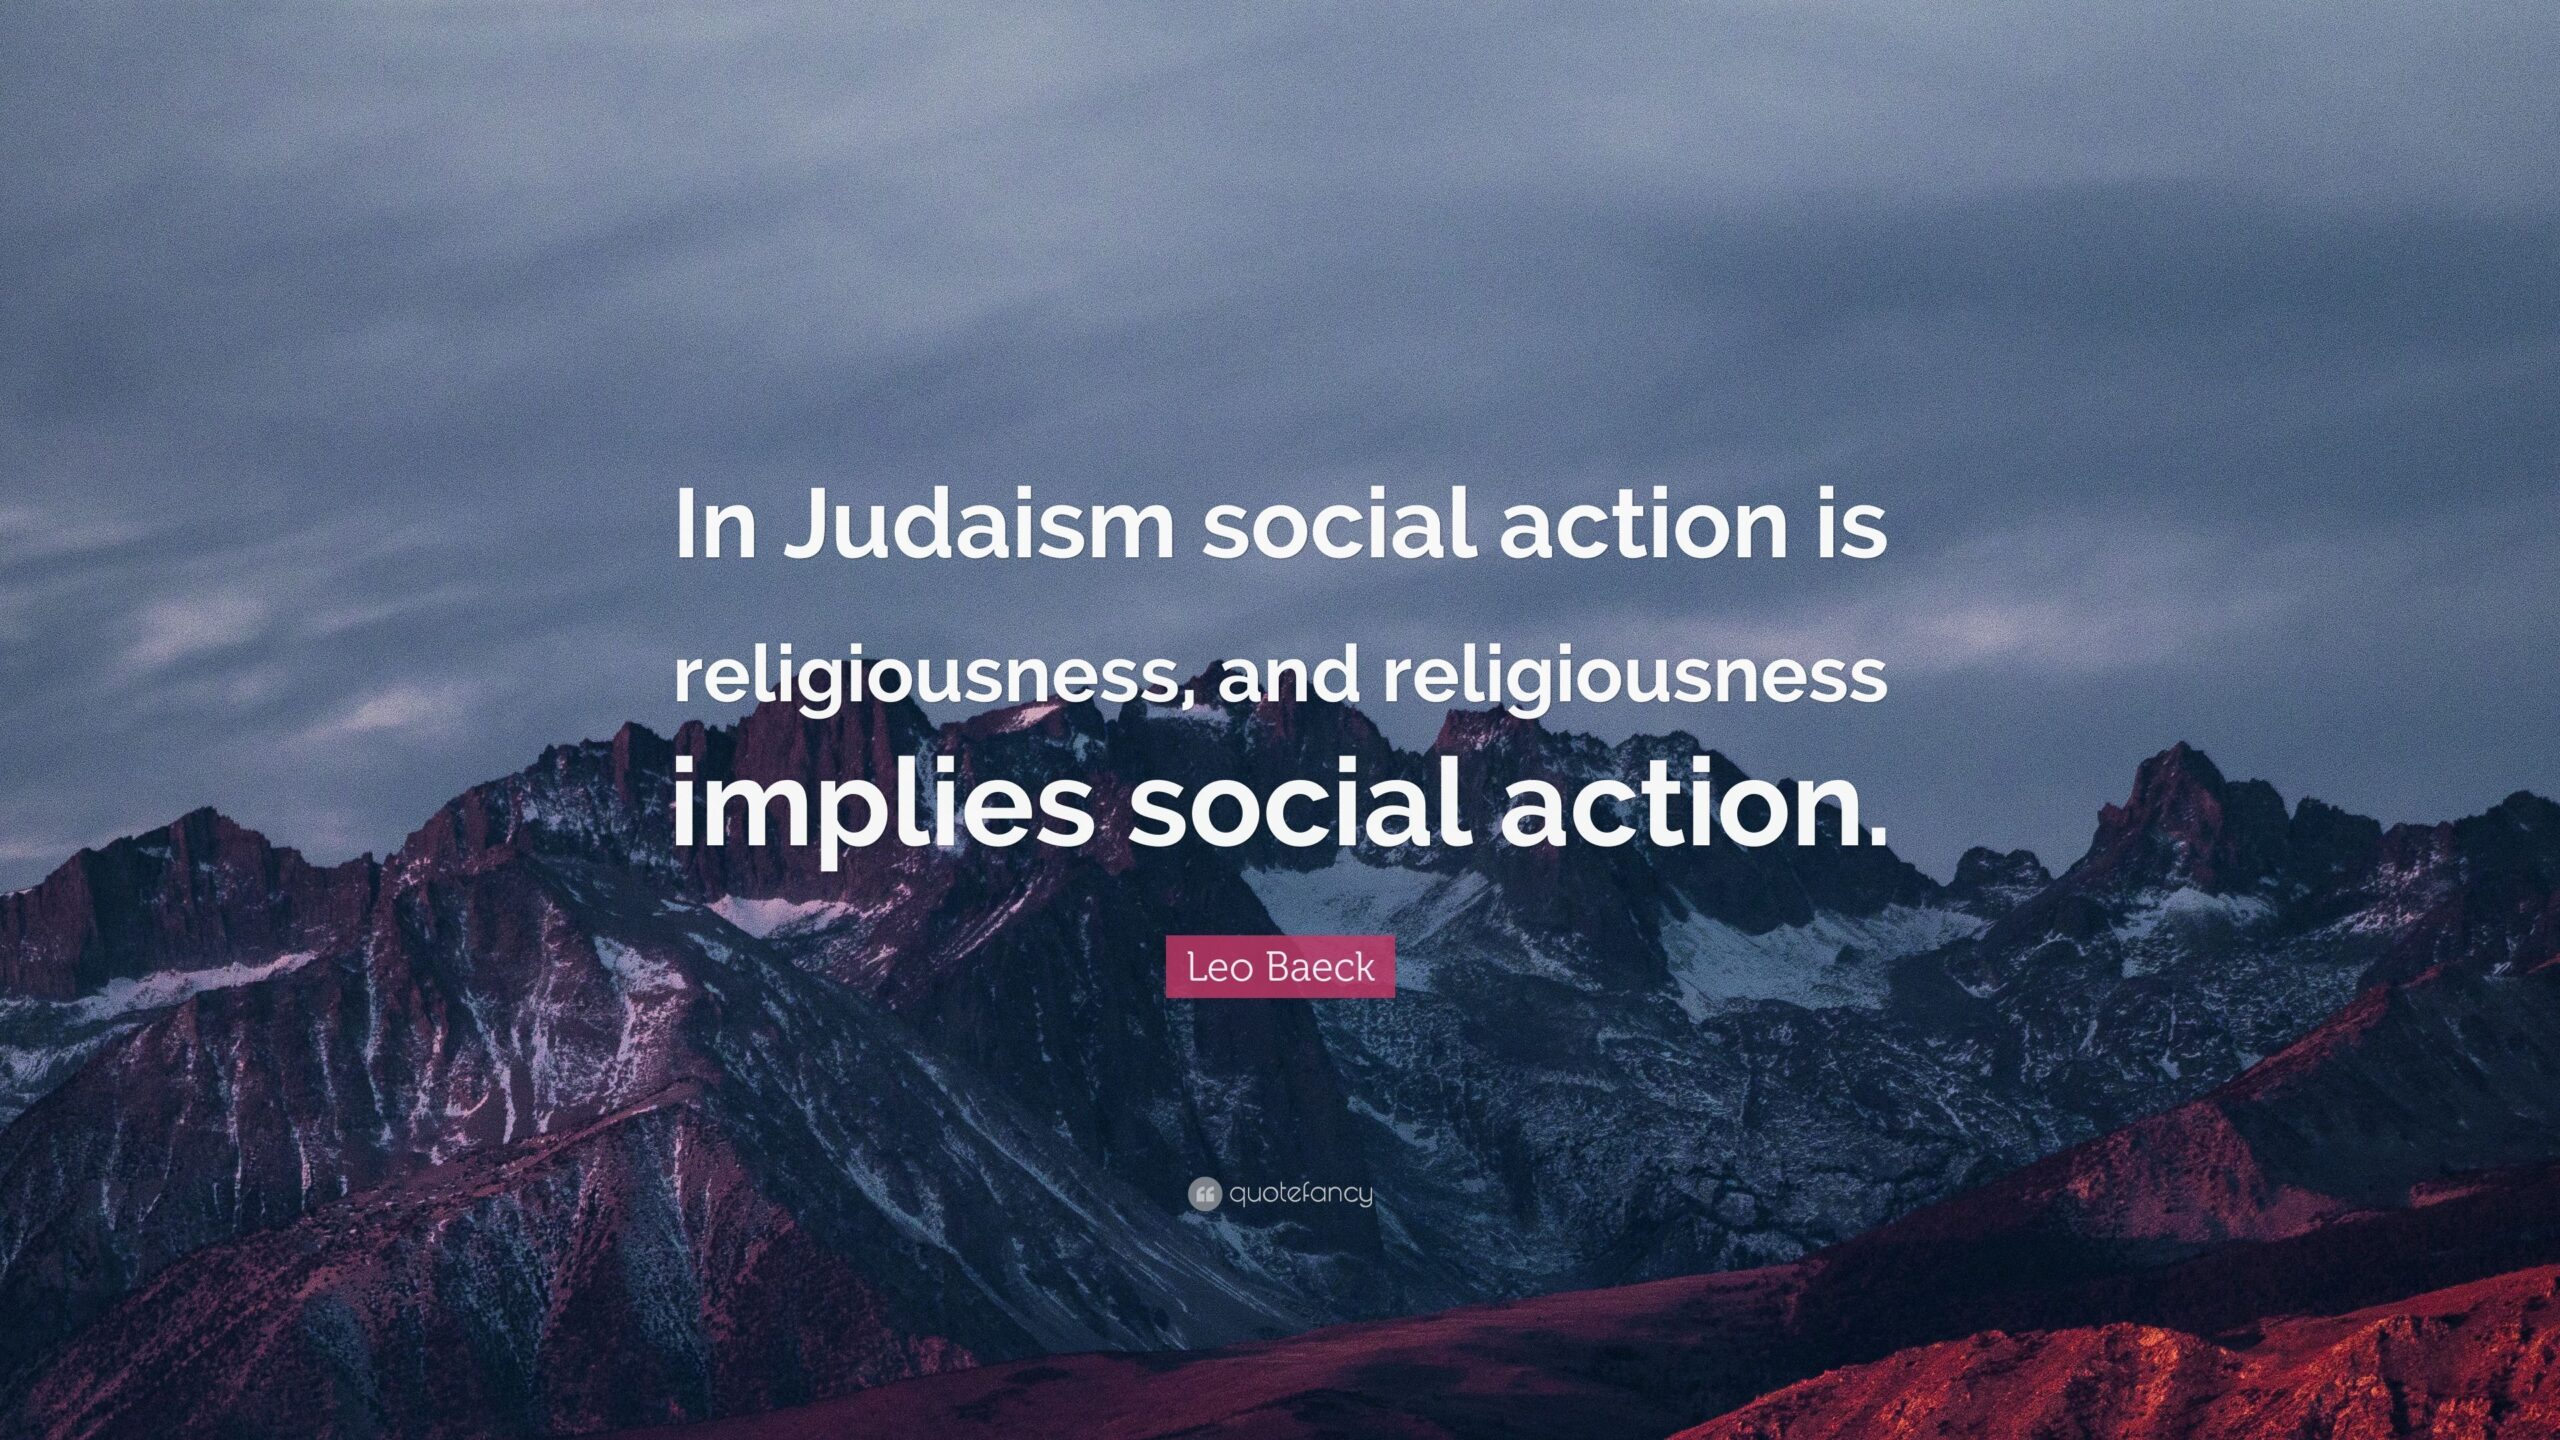 Leo Baeck Quote “In Judaism social action is religiousness, and